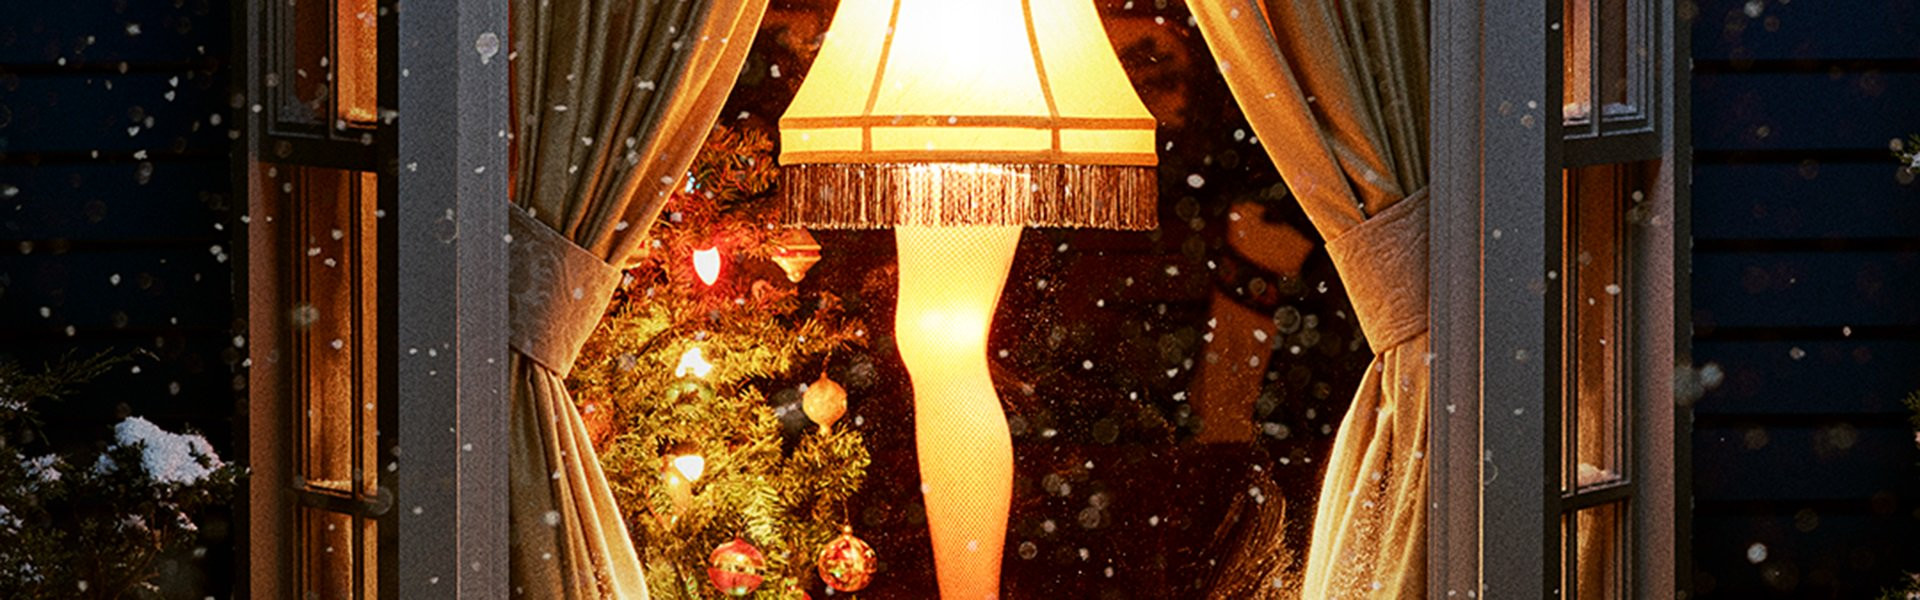 Lamp Christmas Story
 The Pixar lamp is the greatest cinematic lamp brought to